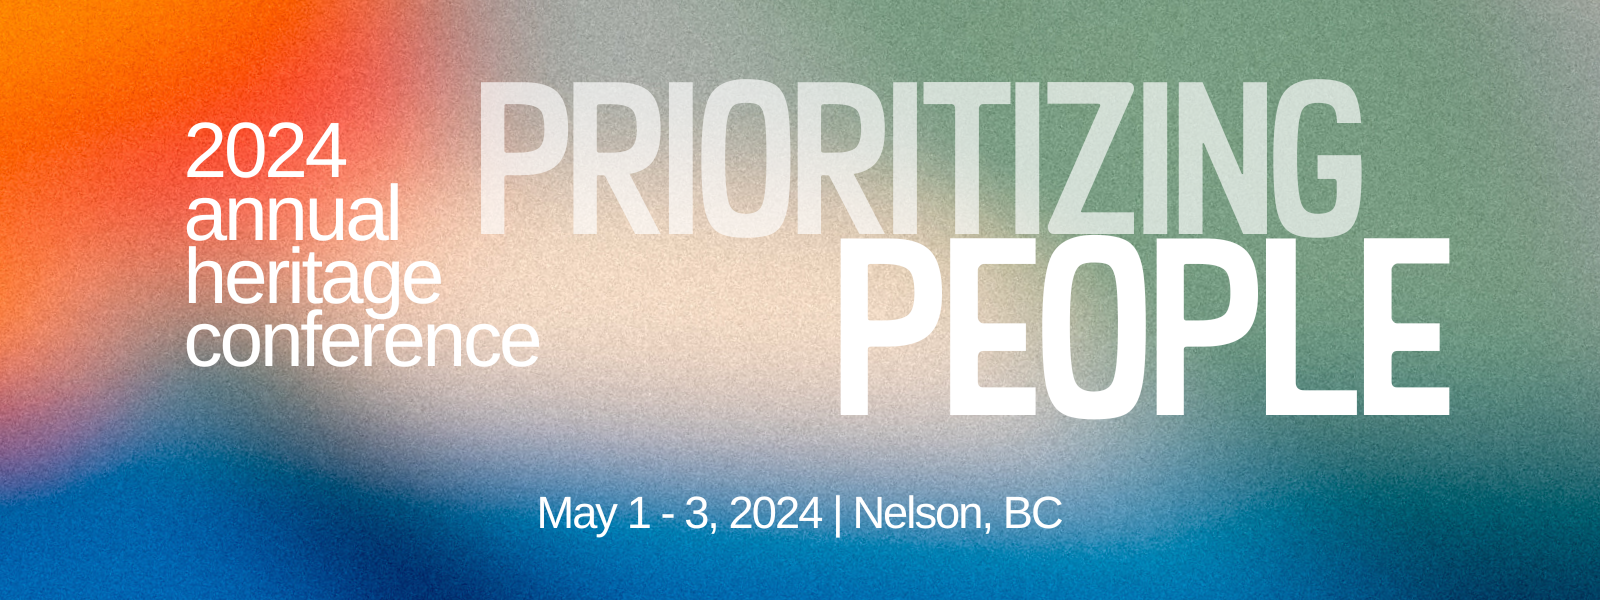 Heritage BC 2024 Conference Prioritizing People Banner